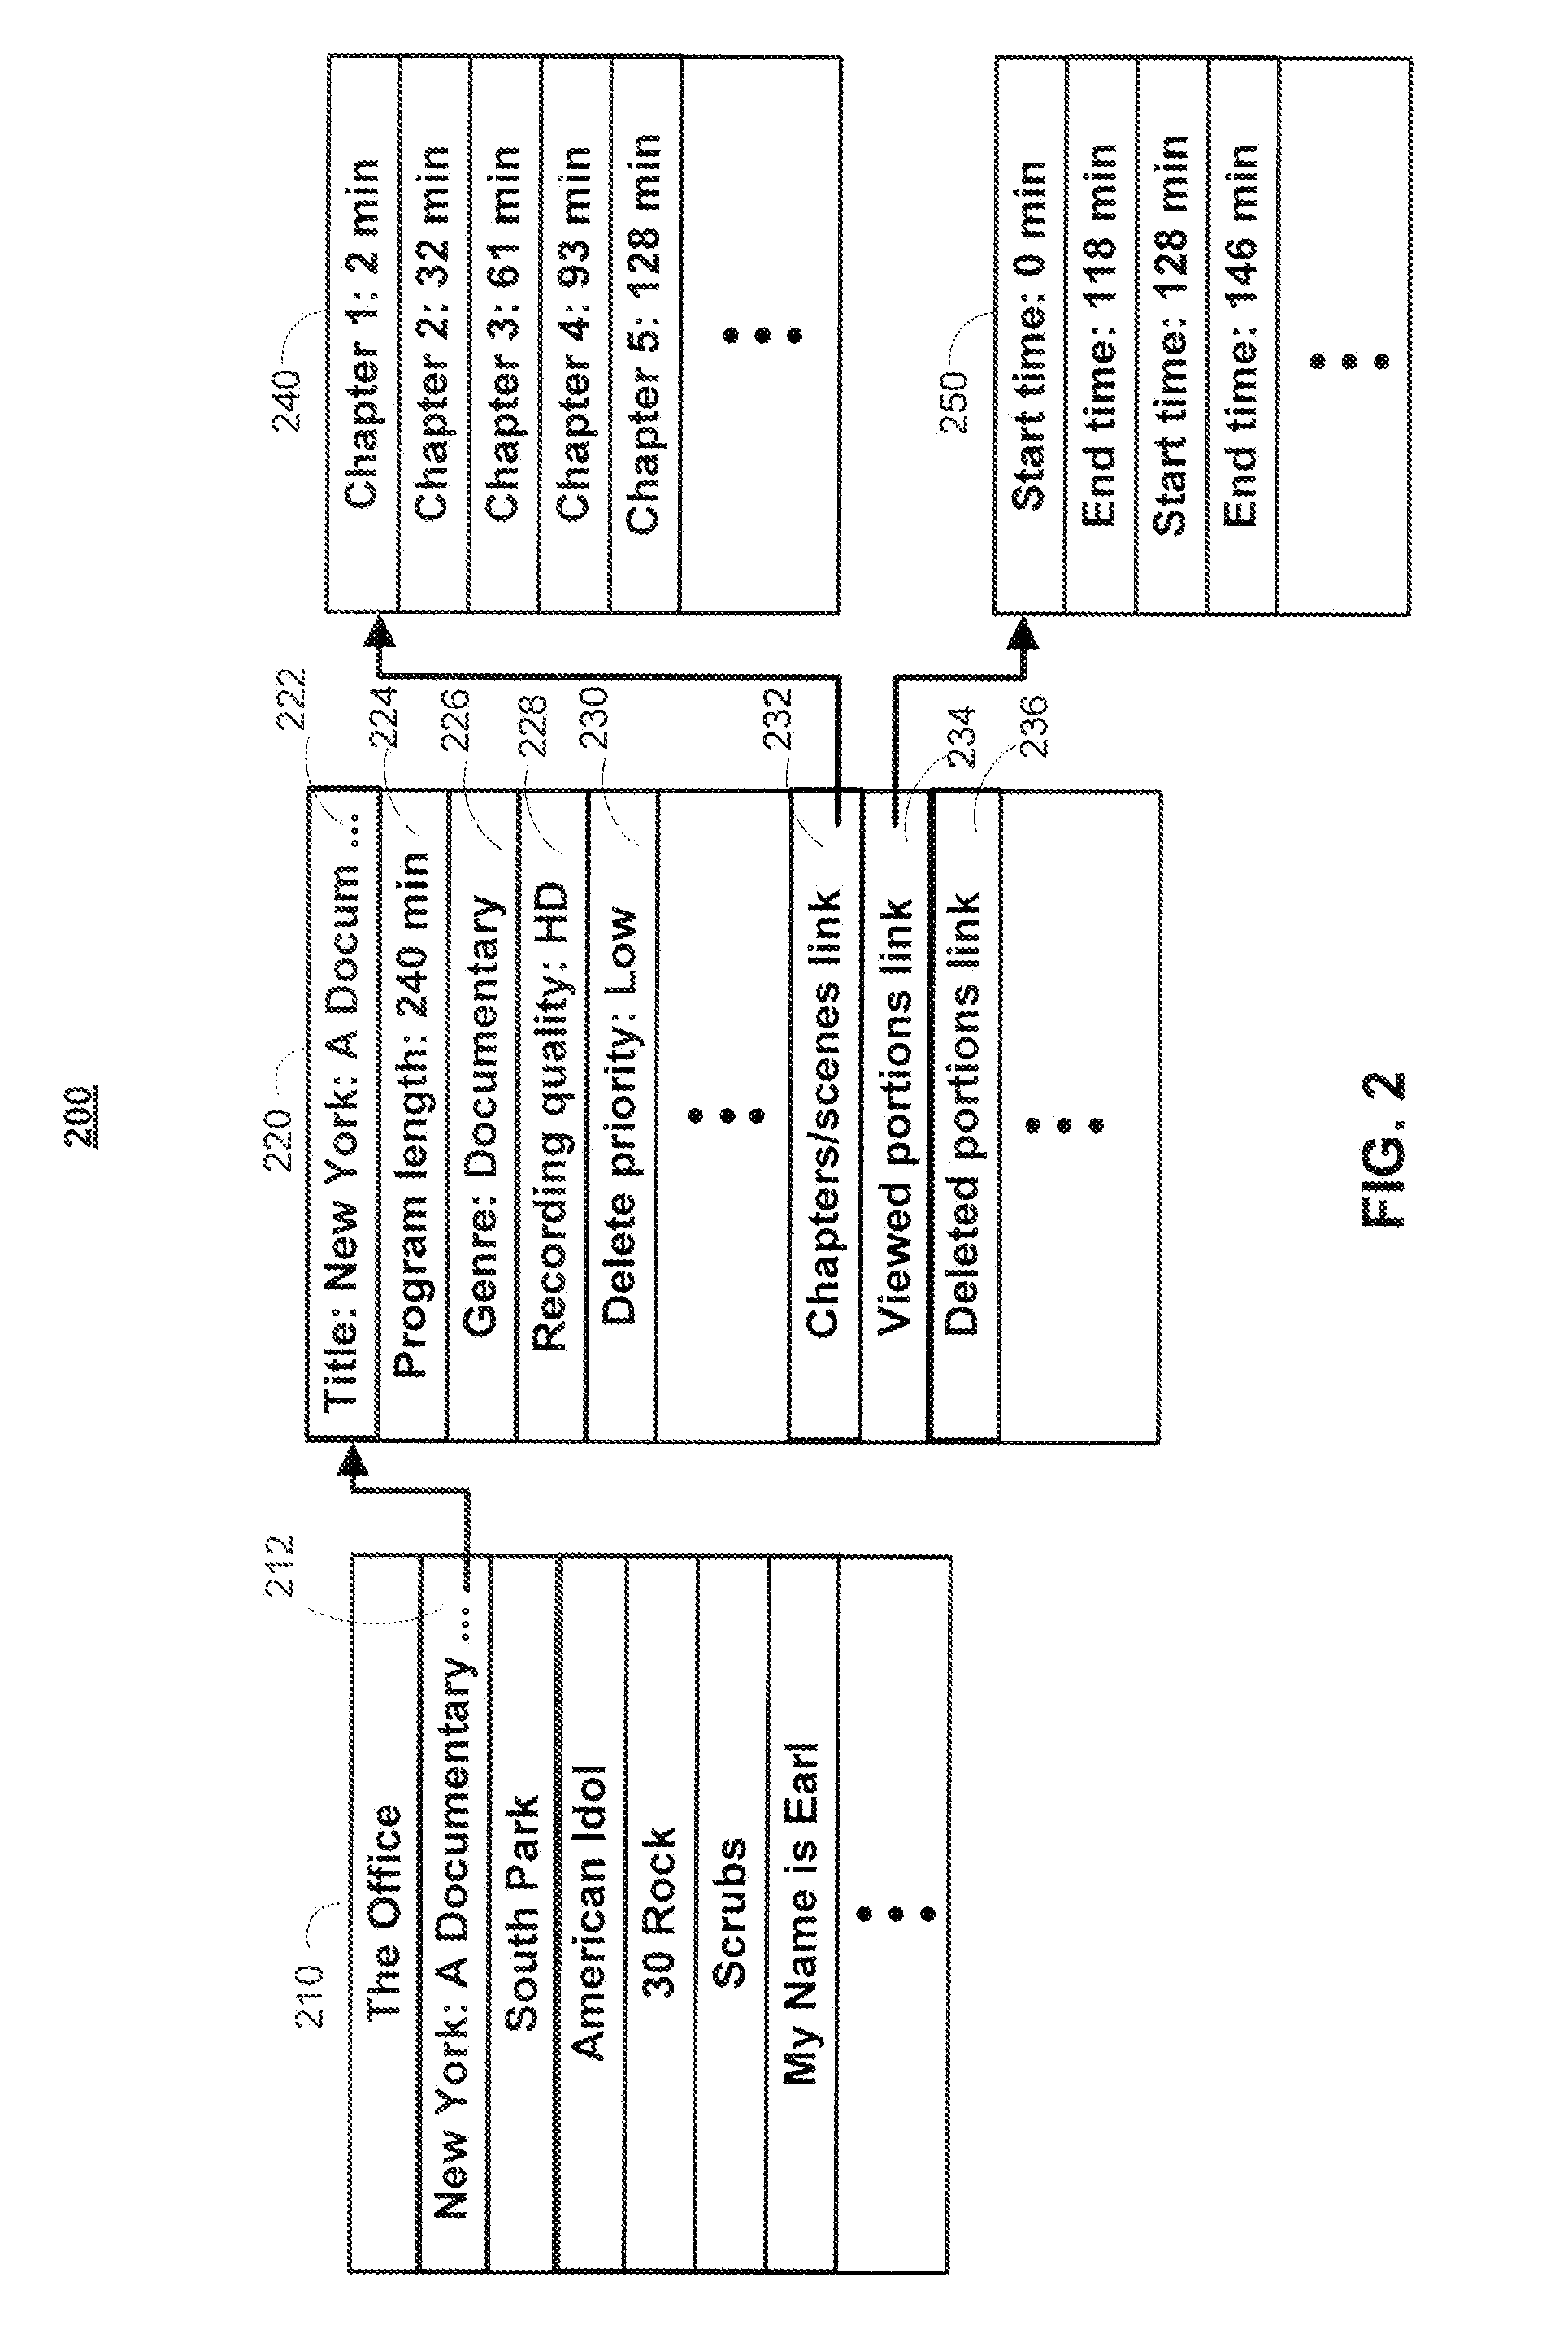 Systems and methods for deleting viewed portions of recorded programs